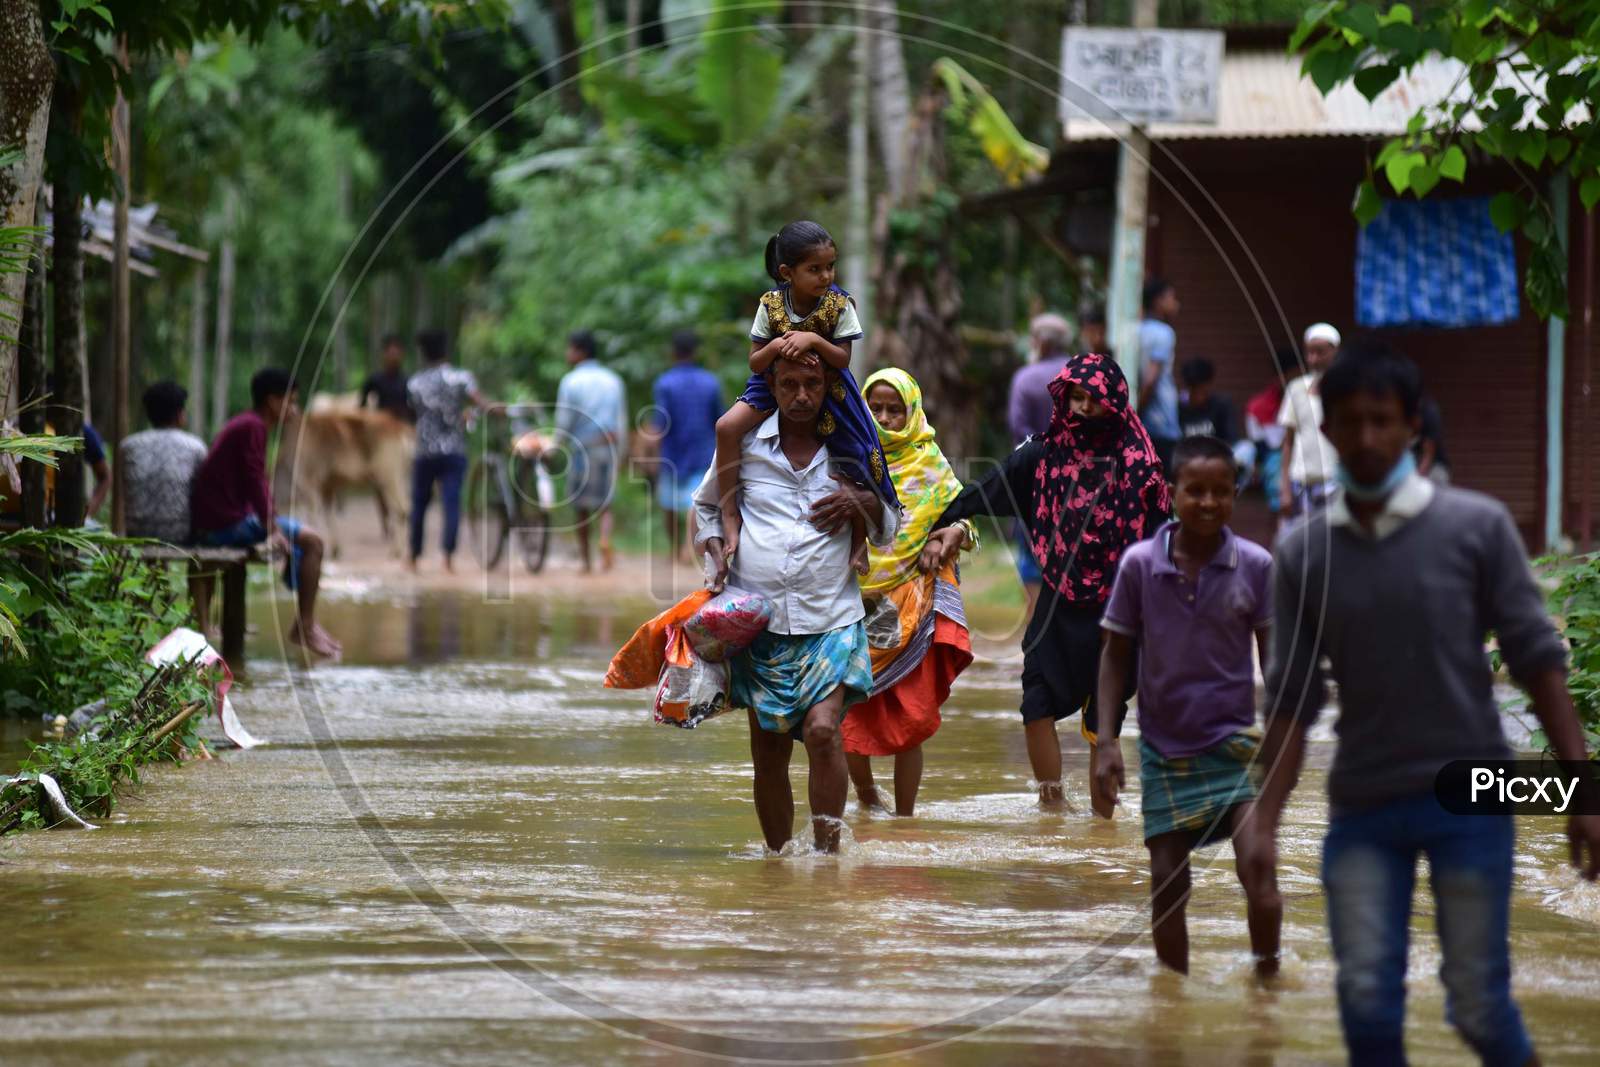 A Man Carries His Daughter As He  Wades Through A Flooded Area To Reach A Safer Place At Flood Affected  At  Bakulguri Village Near Kampur In Nagaon District Of Assam On May 27,2020.